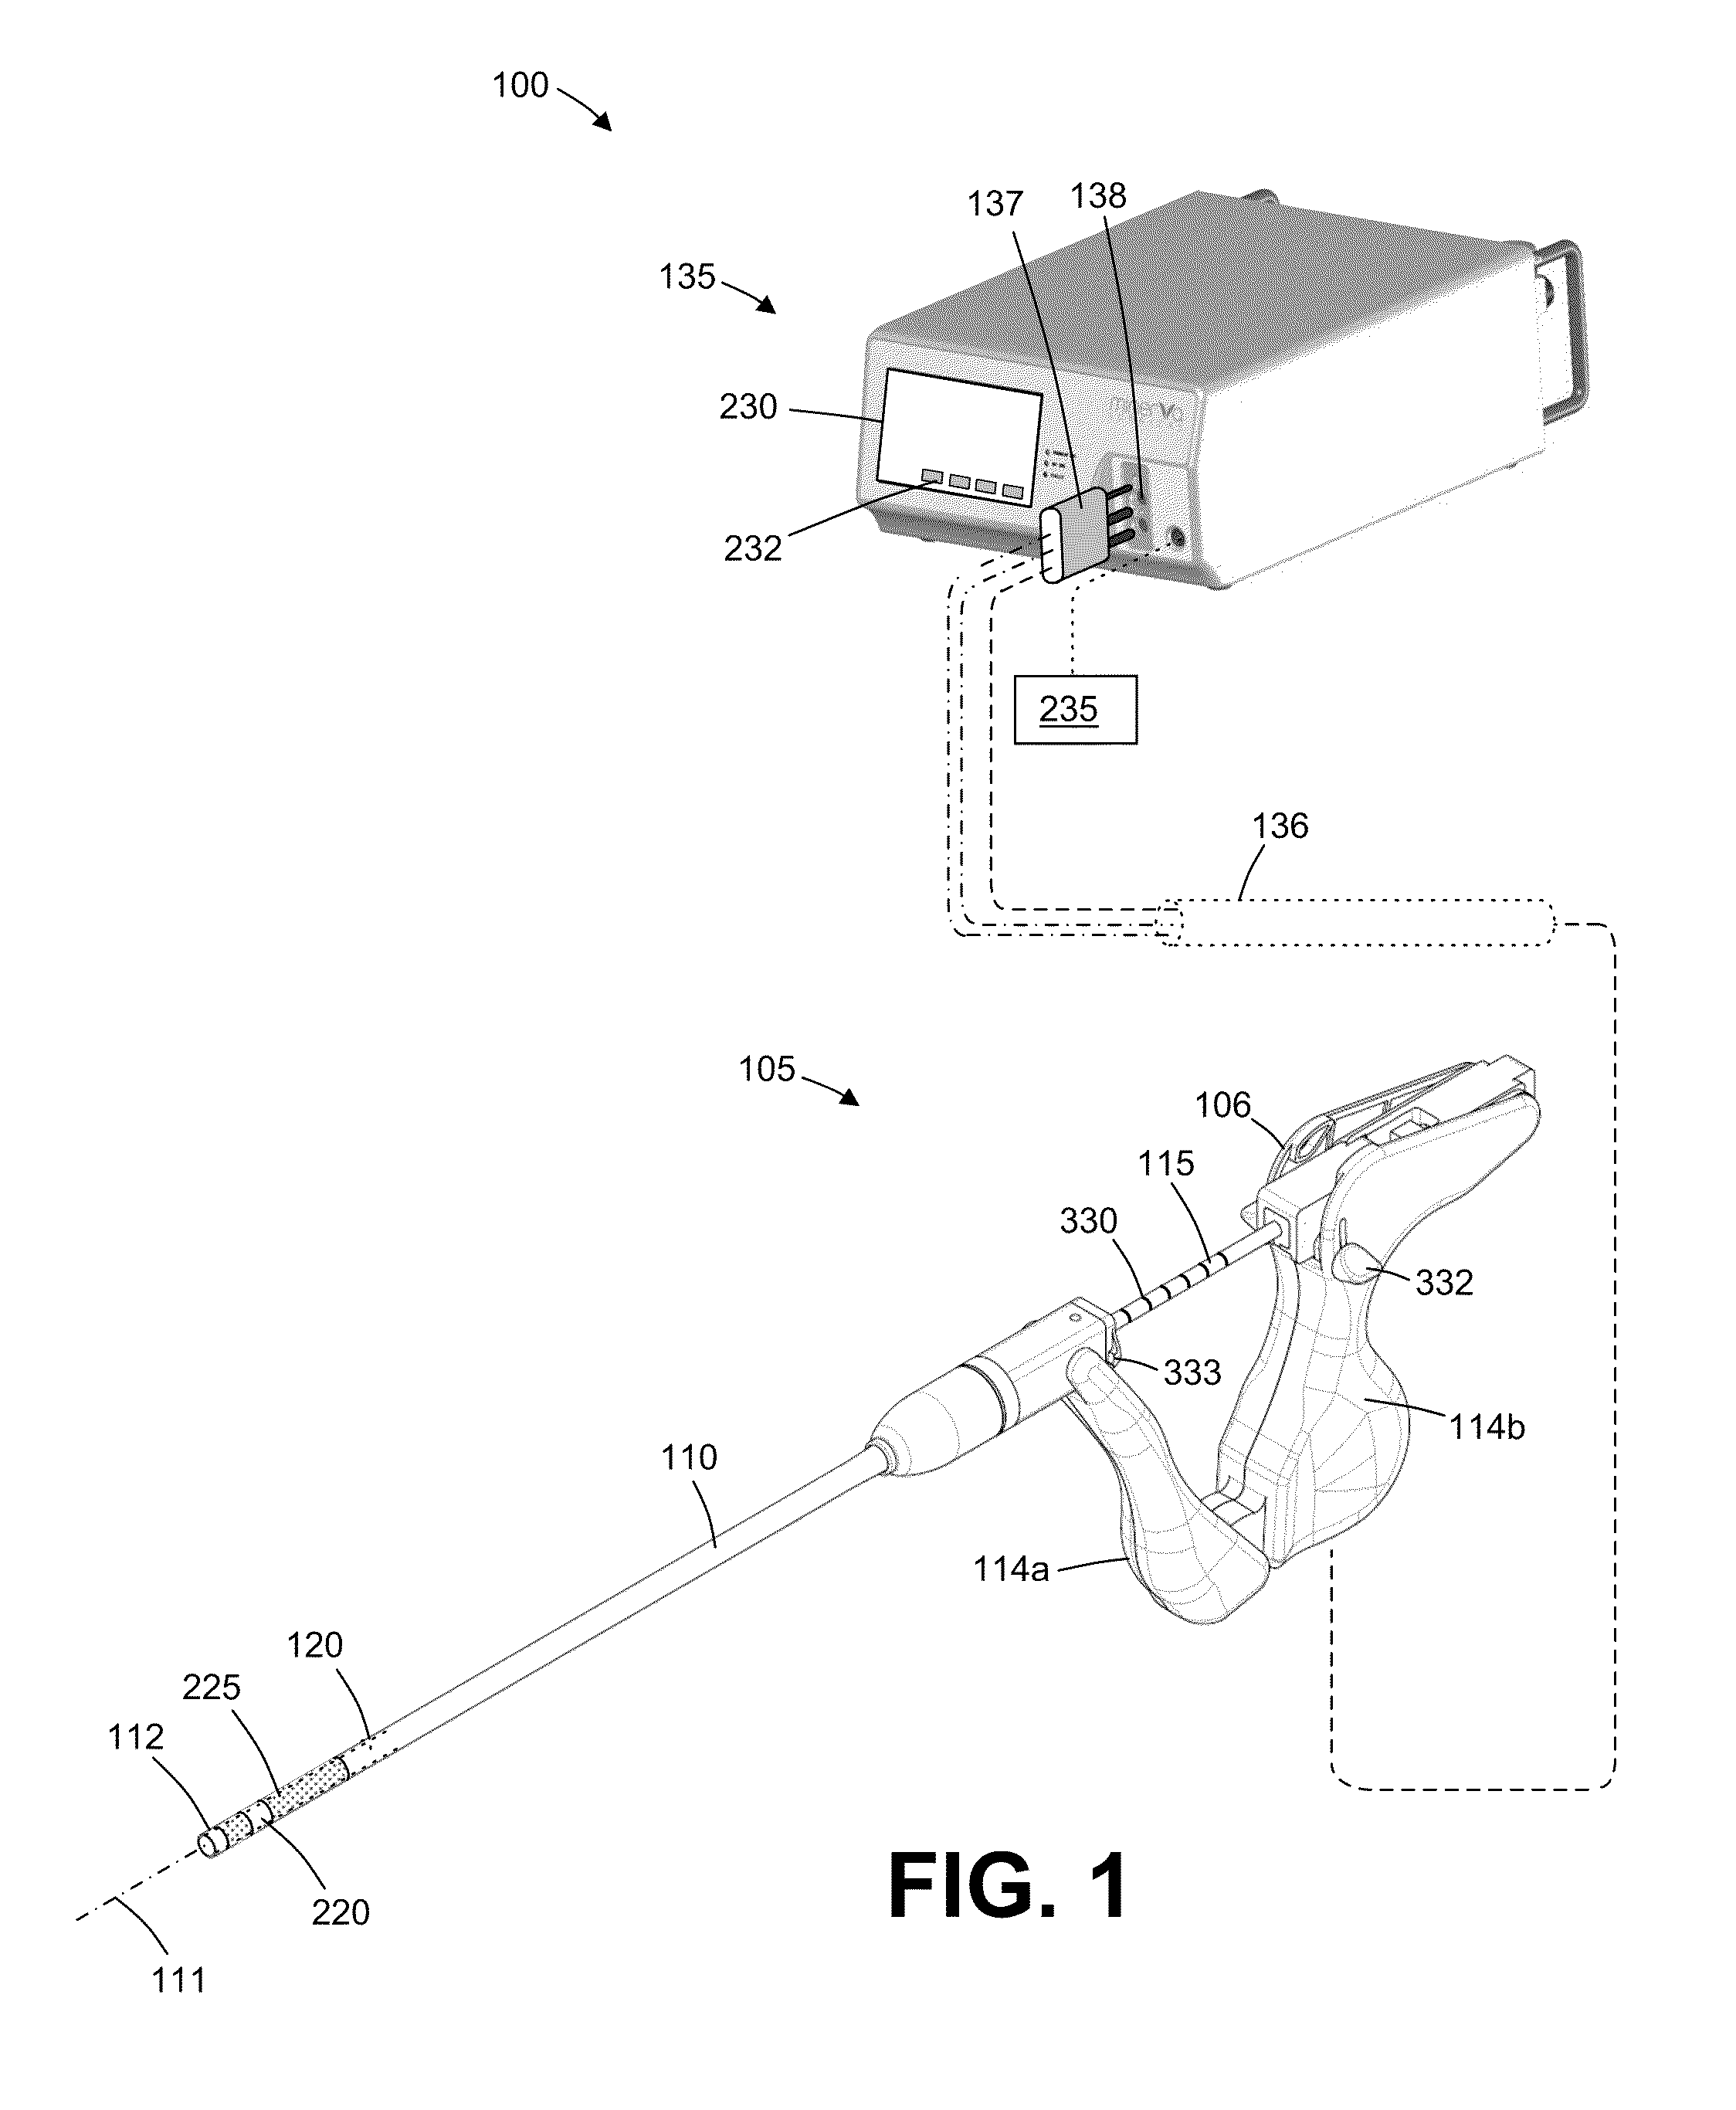 Methods for evaluating the integrity of a uterine cavity